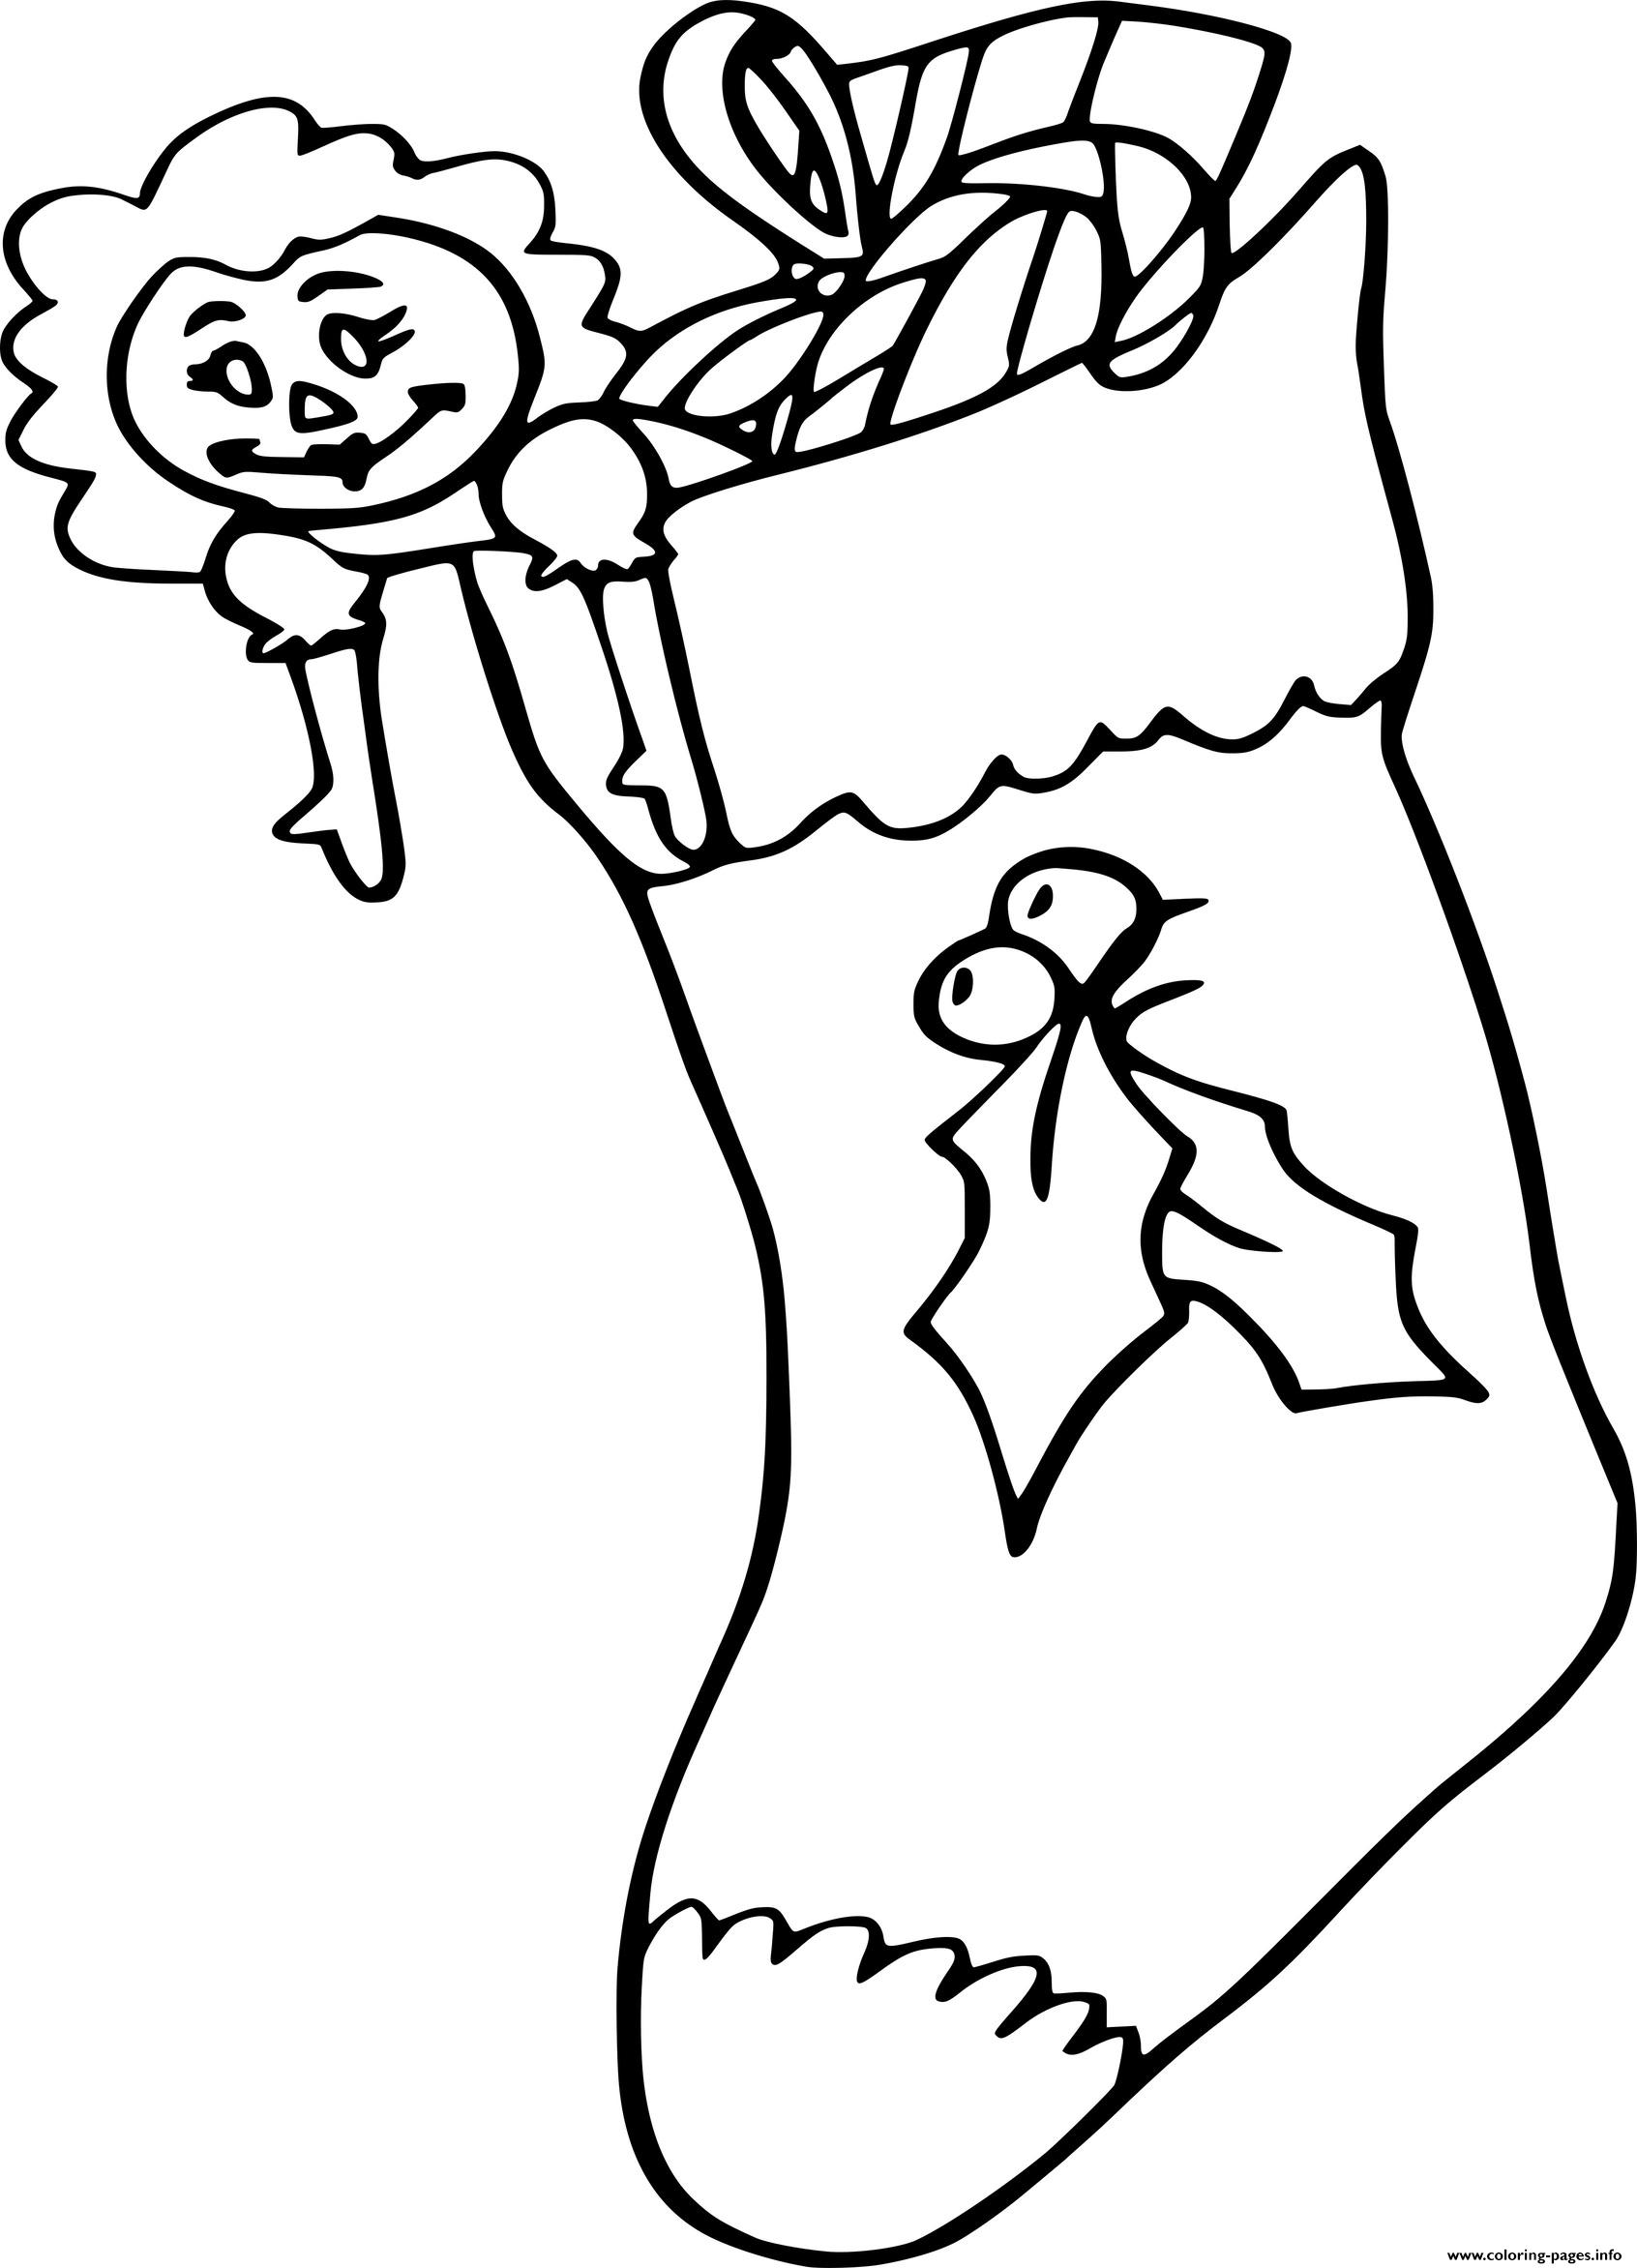 Toy Lion In Stocking Coloring page Printable